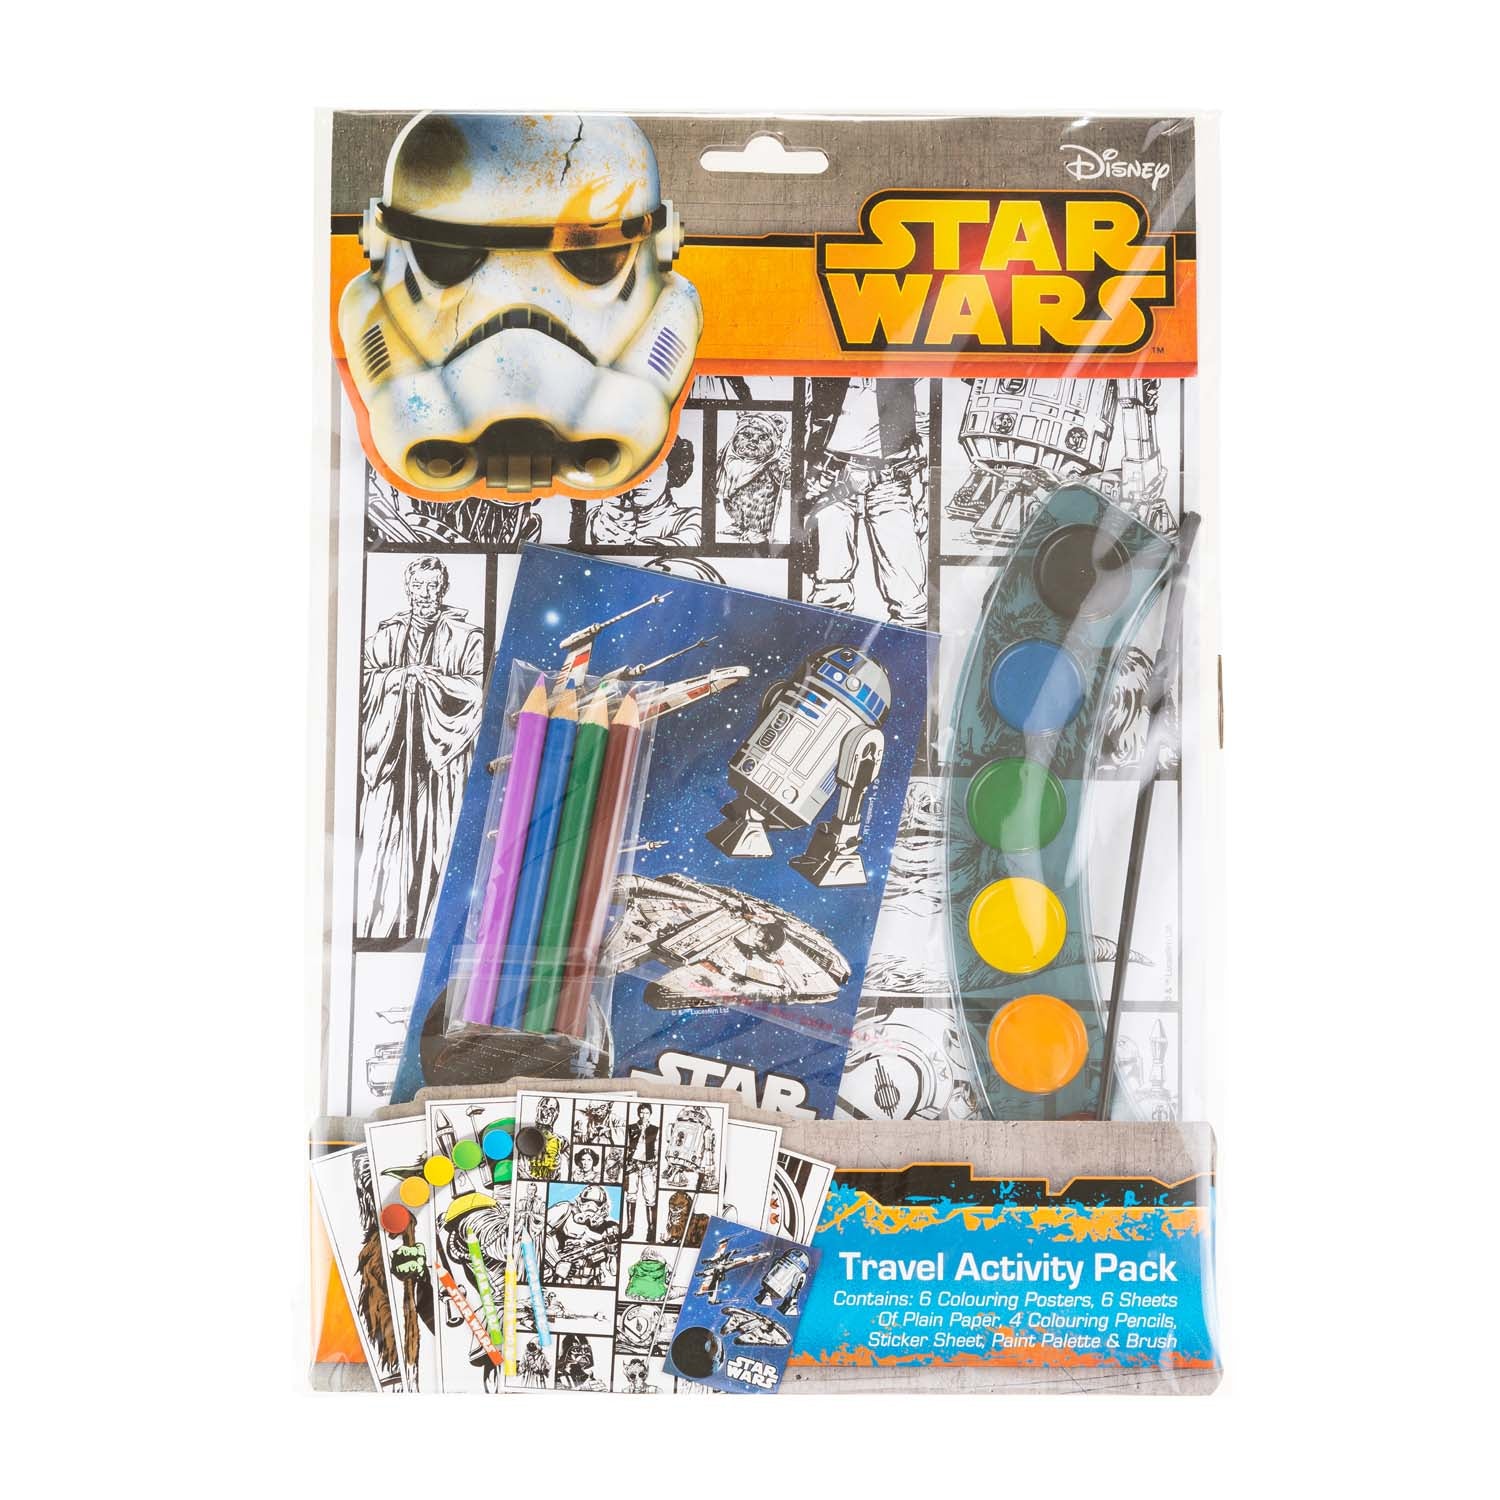 Star Wars A4 Travel Activity Pack RRP 3.99 CLEARANCE XL 1.99